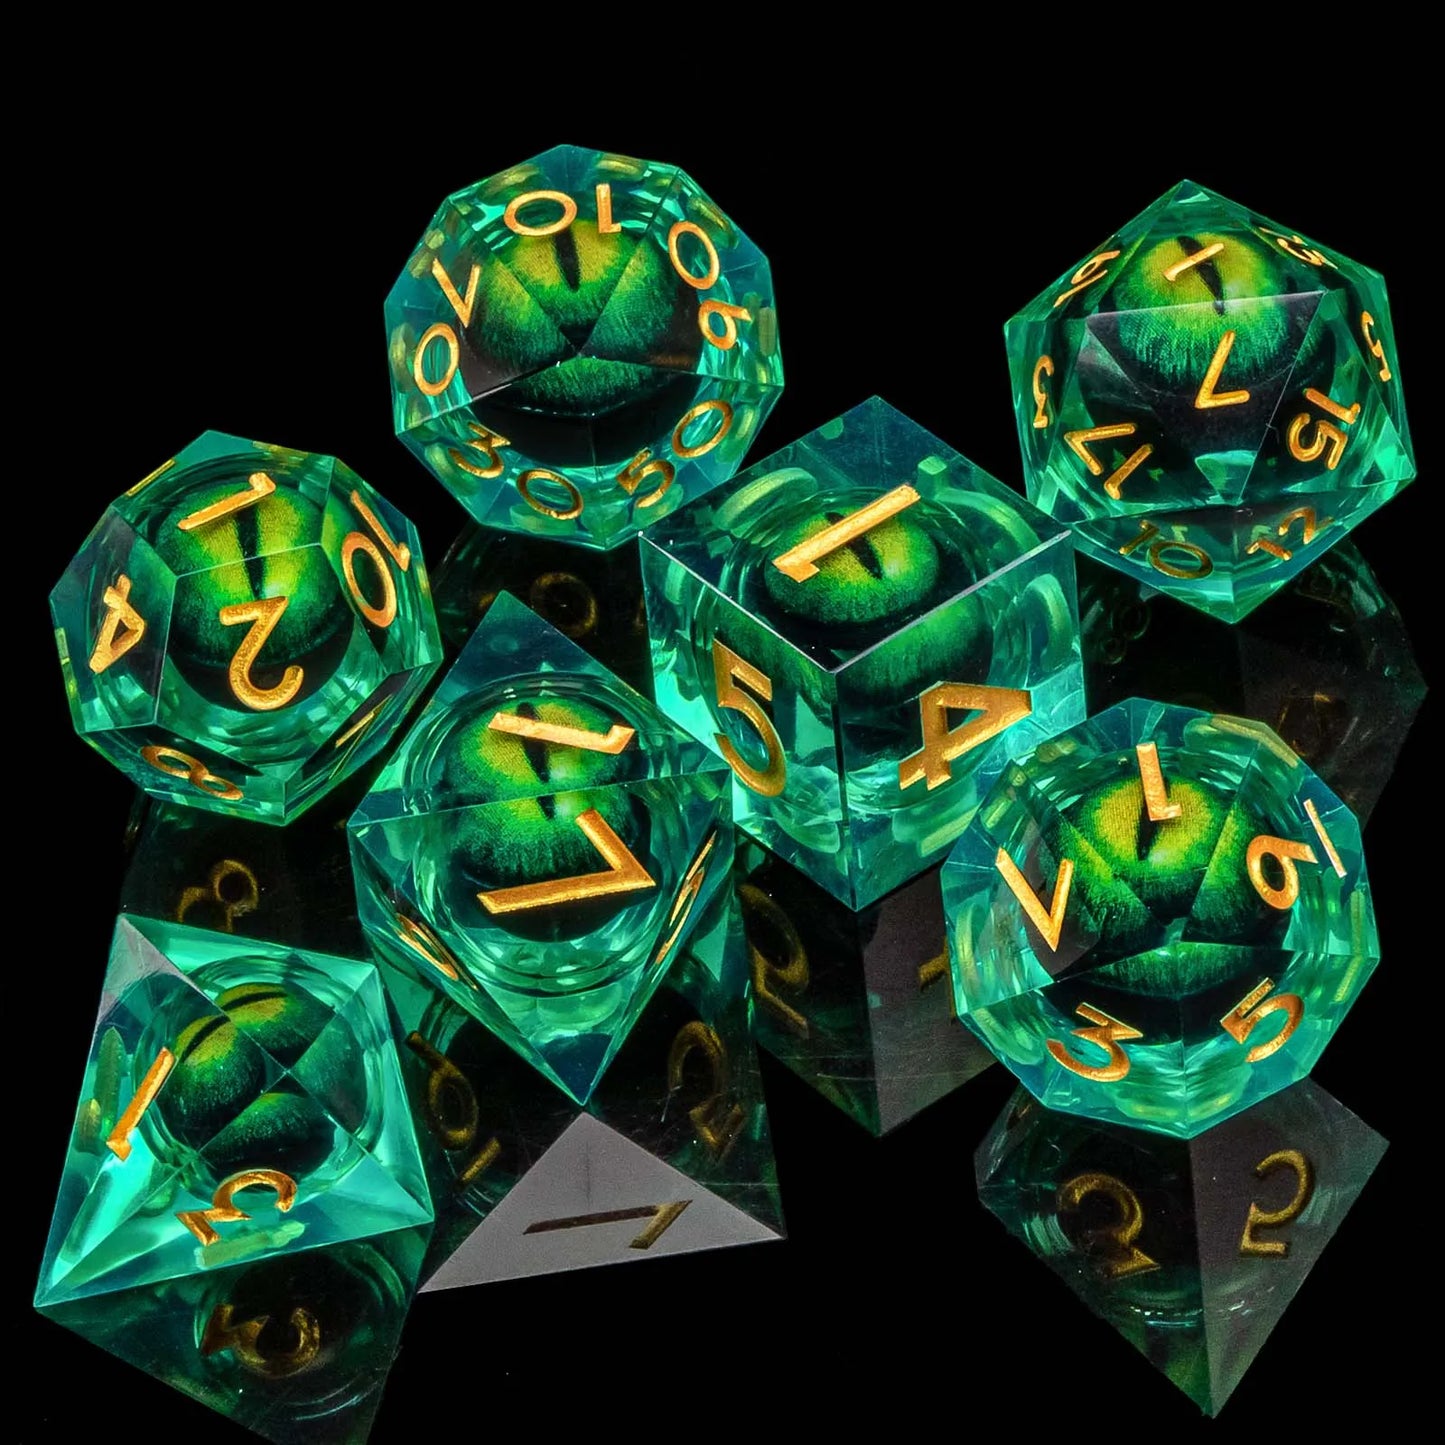 D and D Flowing Sand Sharp Edge Dragon Eye Dnd Resin RPG Polyhedral D&D Dice Set For Dungeon and Dragon Pathfinder Role Playing AZ19